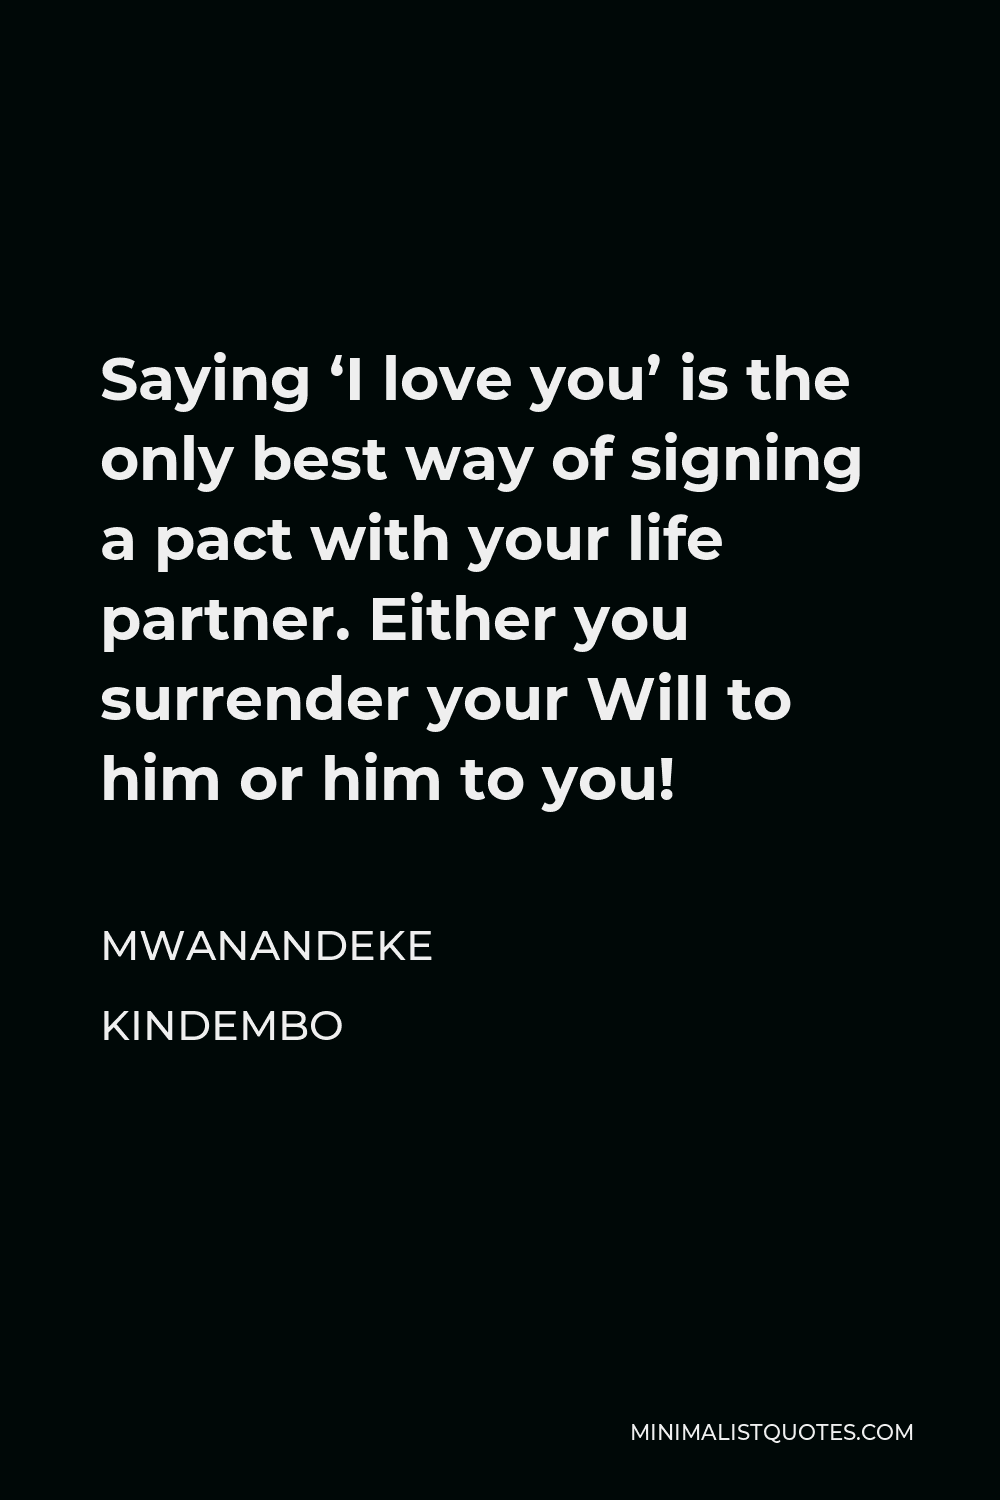 Mwanandeke Kindembo Quote - Saying ‘I love you’ is the only best way of signing a pact with your life partner. Either you surrender your Will to him or him to you!